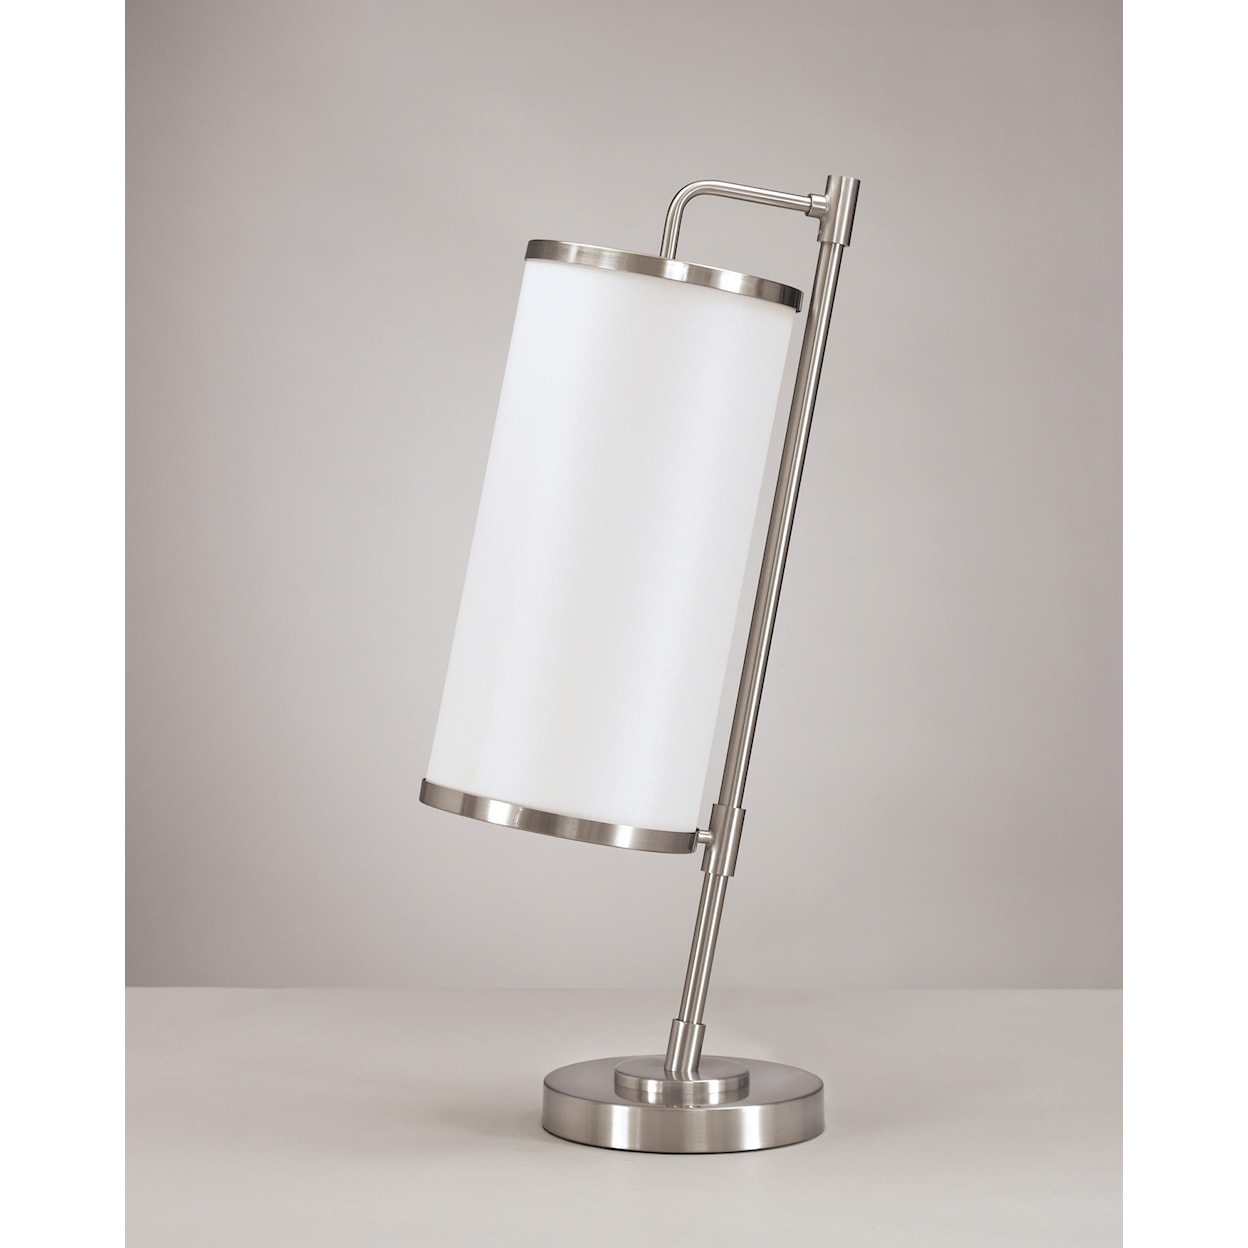 Signature Design by Ashley Lamps - Metro Modern Rylee Metal Table Lamp